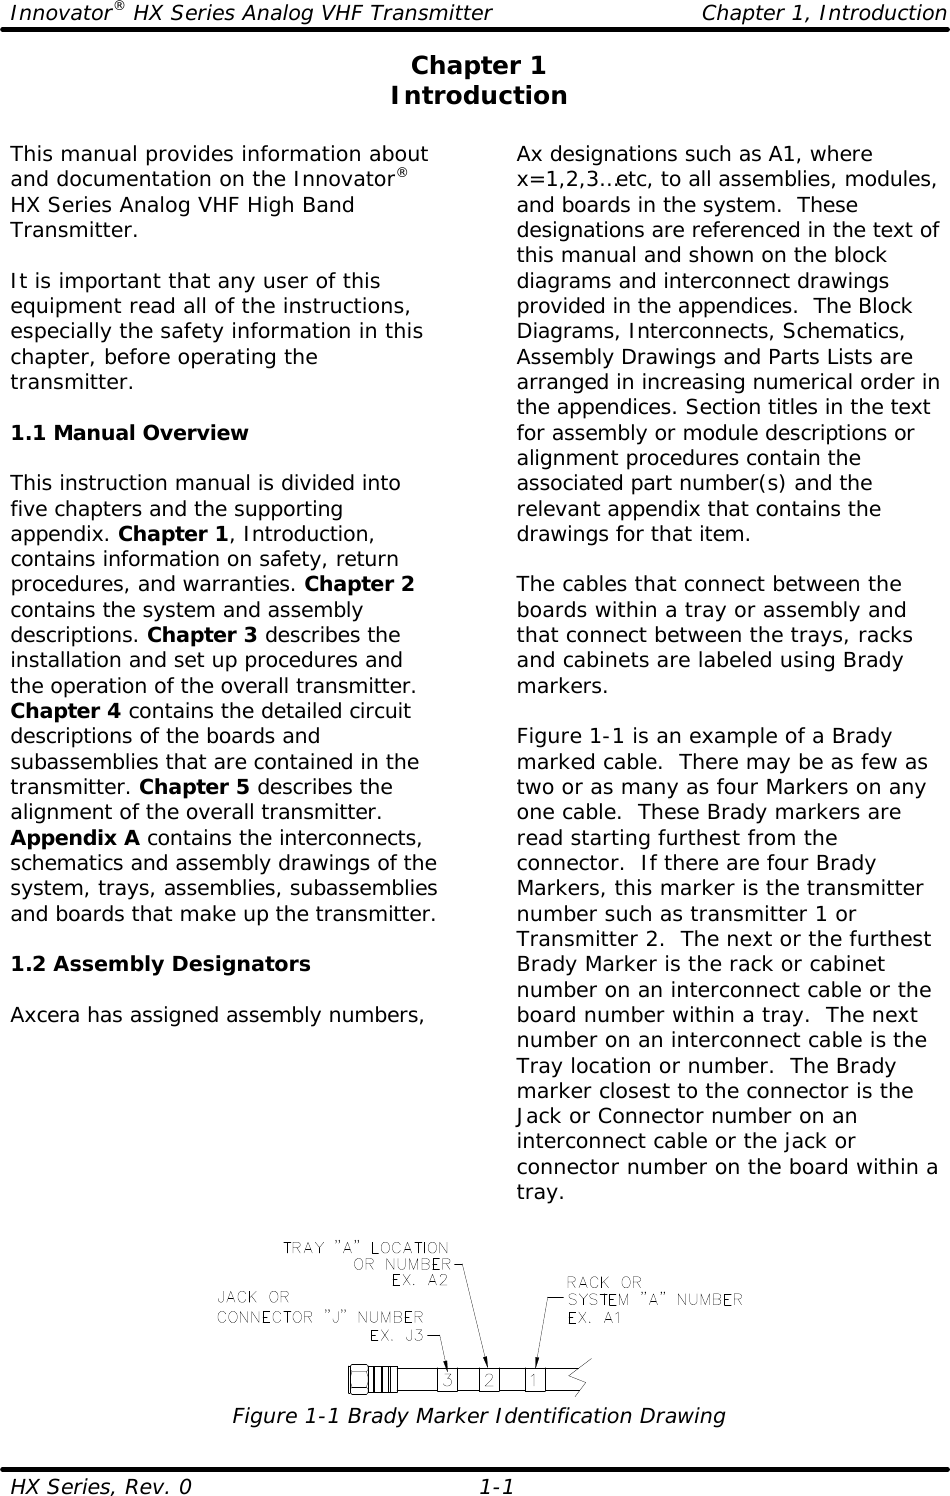 Innovator® HX Series Analog VHF Transmitter Chapter 1, Introduction HX Series, Rev. 0    1-1  Chapter 1 Introduction  This manual provides information about and documentation on the Innovator® HX Series Analog VHF High Band Transmitter.  It is important that any user of this equipment read all of the instructions, especially the safety information in this chapter, before operating the transmitter.  1.1 Manual Overview  This instruction manual is divided into five chapters and the supporting appendix. Chapter 1, Introduction, contains information on safety, return procedures, and warranties. Chapter 2 contains the system and assembly descriptions. Chapter 3 describes the installation and set up procedures and the operation of the overall transmitter. Chapter 4 contains the detailed circuit descriptions of the boards and subassemblies that are contained in the transmitter. Chapter 5 describes the alignment of the overall transmitter. Appendix A contains the interconnects, schematics and assembly drawings of the system, trays, assemblies, subassemblies and boards that make up the transmitter.  1.2 Assembly Designators  Axcera has assigned assembly numbers, Ax designations such as A1, where x=1,2,3…etc, to all assemblies, modules, and boards in the system.  These designations are referenced in the text of this manual and shown on the block diagrams and interconnect drawings provided in the appendices.  The Block Diagrams, Interconnects, Schematics, Assembly Drawings and Parts Lists are arranged in increasing numerical order in the appendices. Section titles in the text for assembly or module descriptions or alignment procedures contain the associated part number(s) and the relevant appendix that contains the drawings for that item.   The cables that connect between the boards within a tray or assembly and that connect between the trays, racks and cabinets are labeled using Brady markers.   Figure 1-1 is an example of a Brady marked cable.  There may be as few as two or as many as four Markers on any one cable.  These Brady markers are read starting furthest from the connector.  If there are four Brady Markers, this marker is the transmitter number such as transmitter 1 or Transmitter 2.  The next or the furthest Brady Marker is the rack or cabinet number on an interconnect cable or the board number within a tray.  The next number on an interconnect cable is the Tray location or number.  The Brady marker closest to the connector is the Jack or Connector number on an interconnect cable or the jack or connector number on the board within a tray.  Figure 1-1 Brady Marker Identification Drawing  